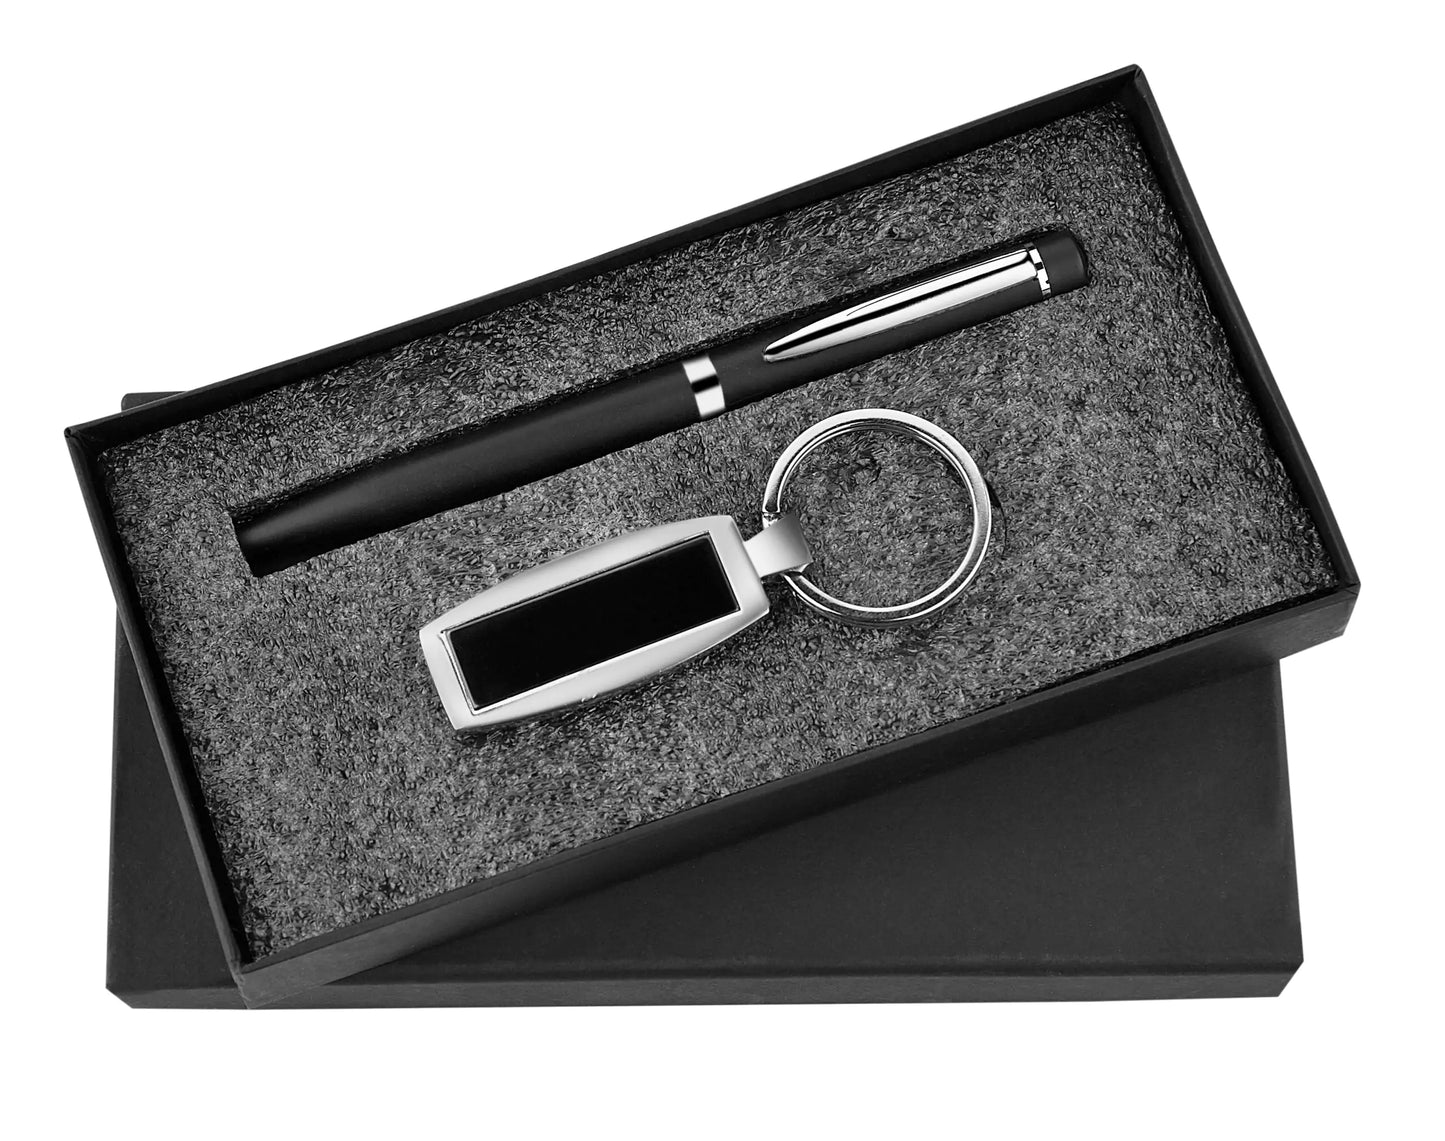 Pen and Keychain 2in1 Combo Gift Set - For Employee Joining Kit, Corporate, Client or Dealer Gifting, Promotional Freebie JKSR107